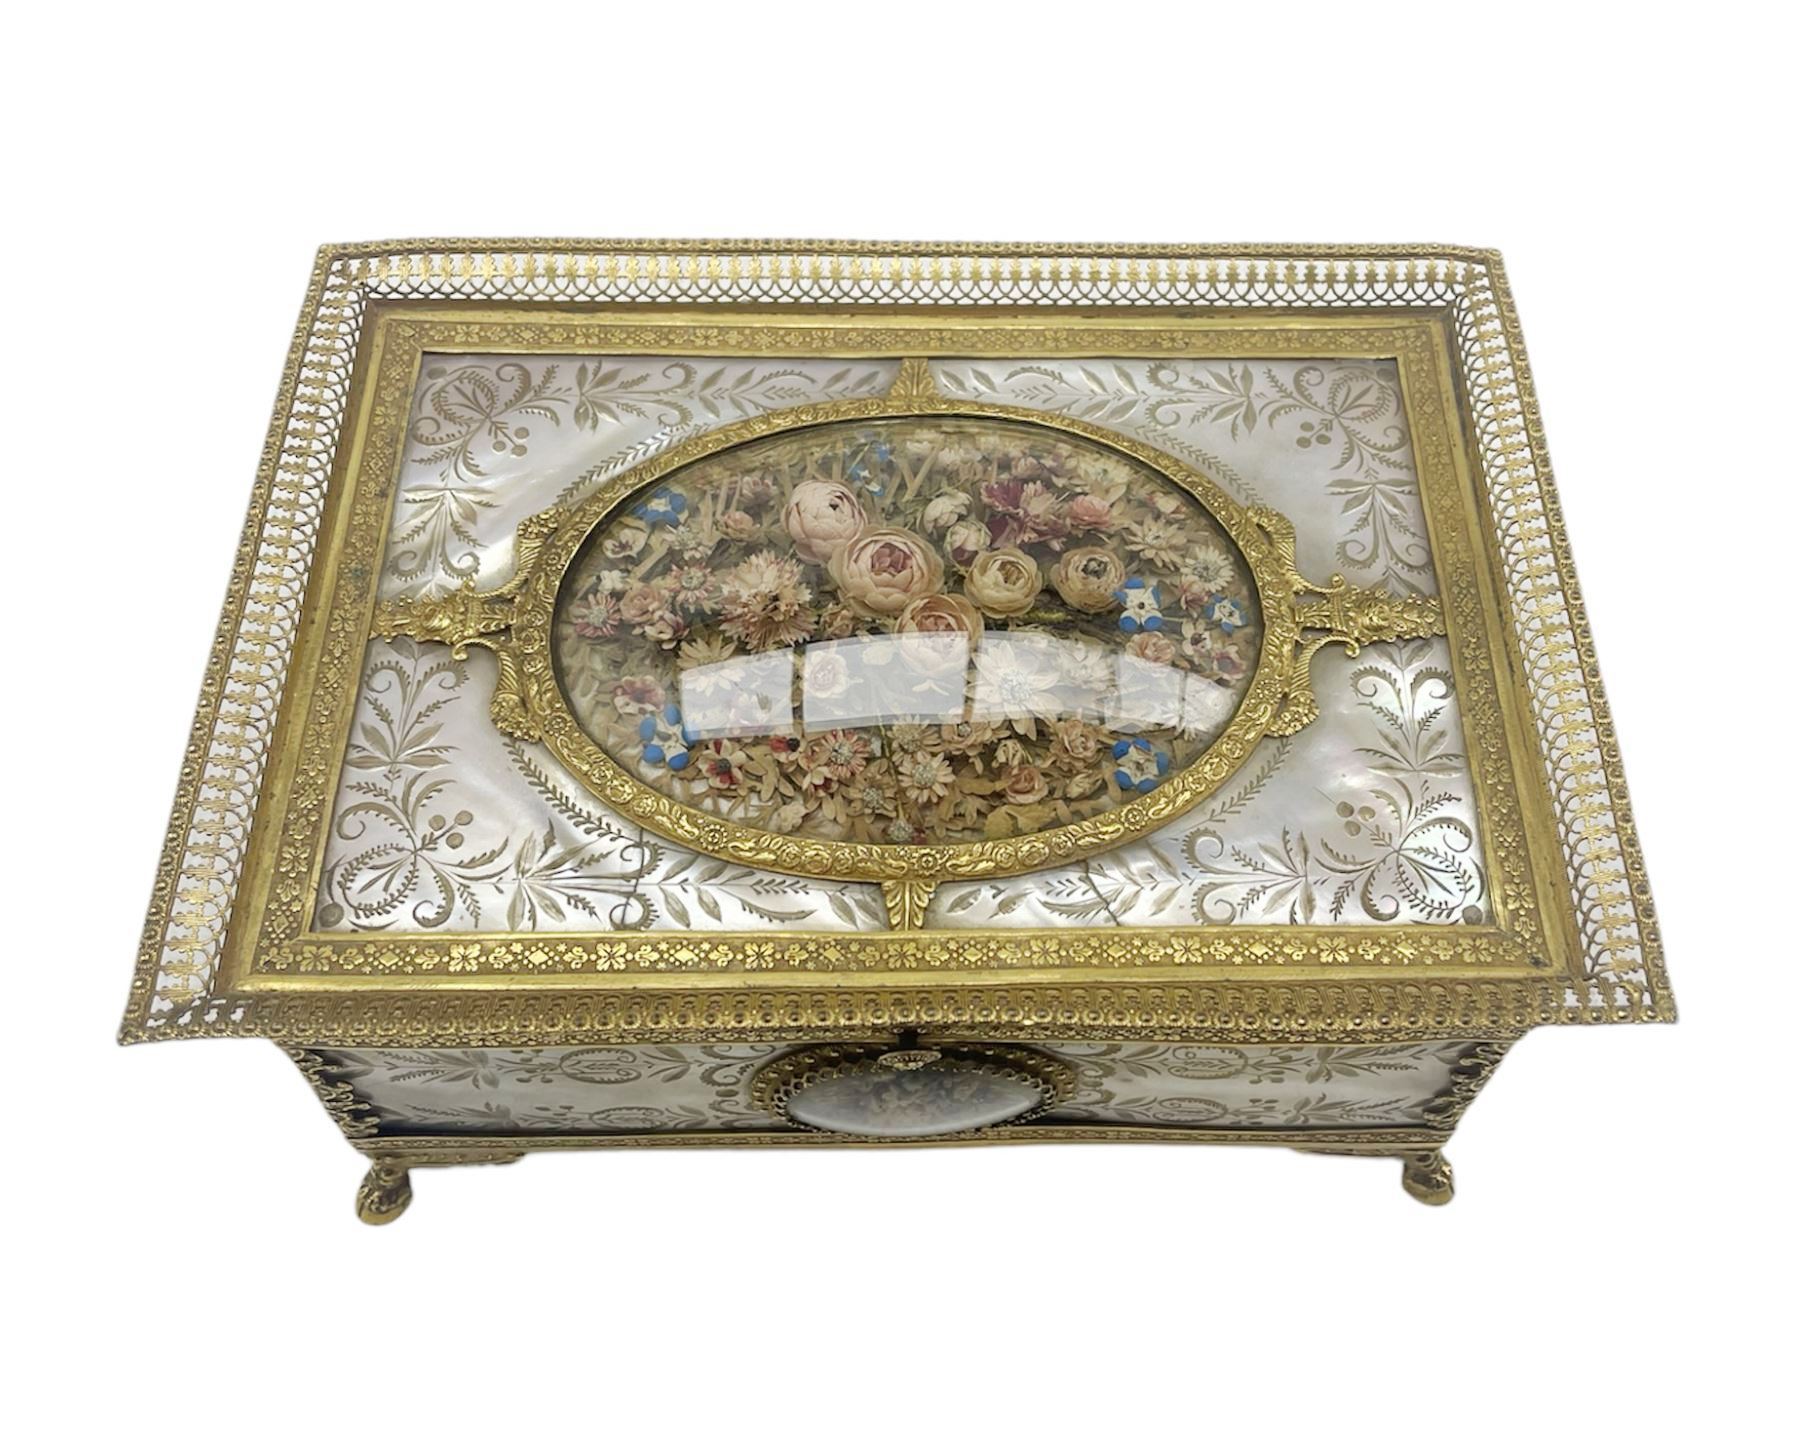 Early 19th century French Palais Royal type ormolu and mother-of-pearl musical sewing etui - Image 14 of 19